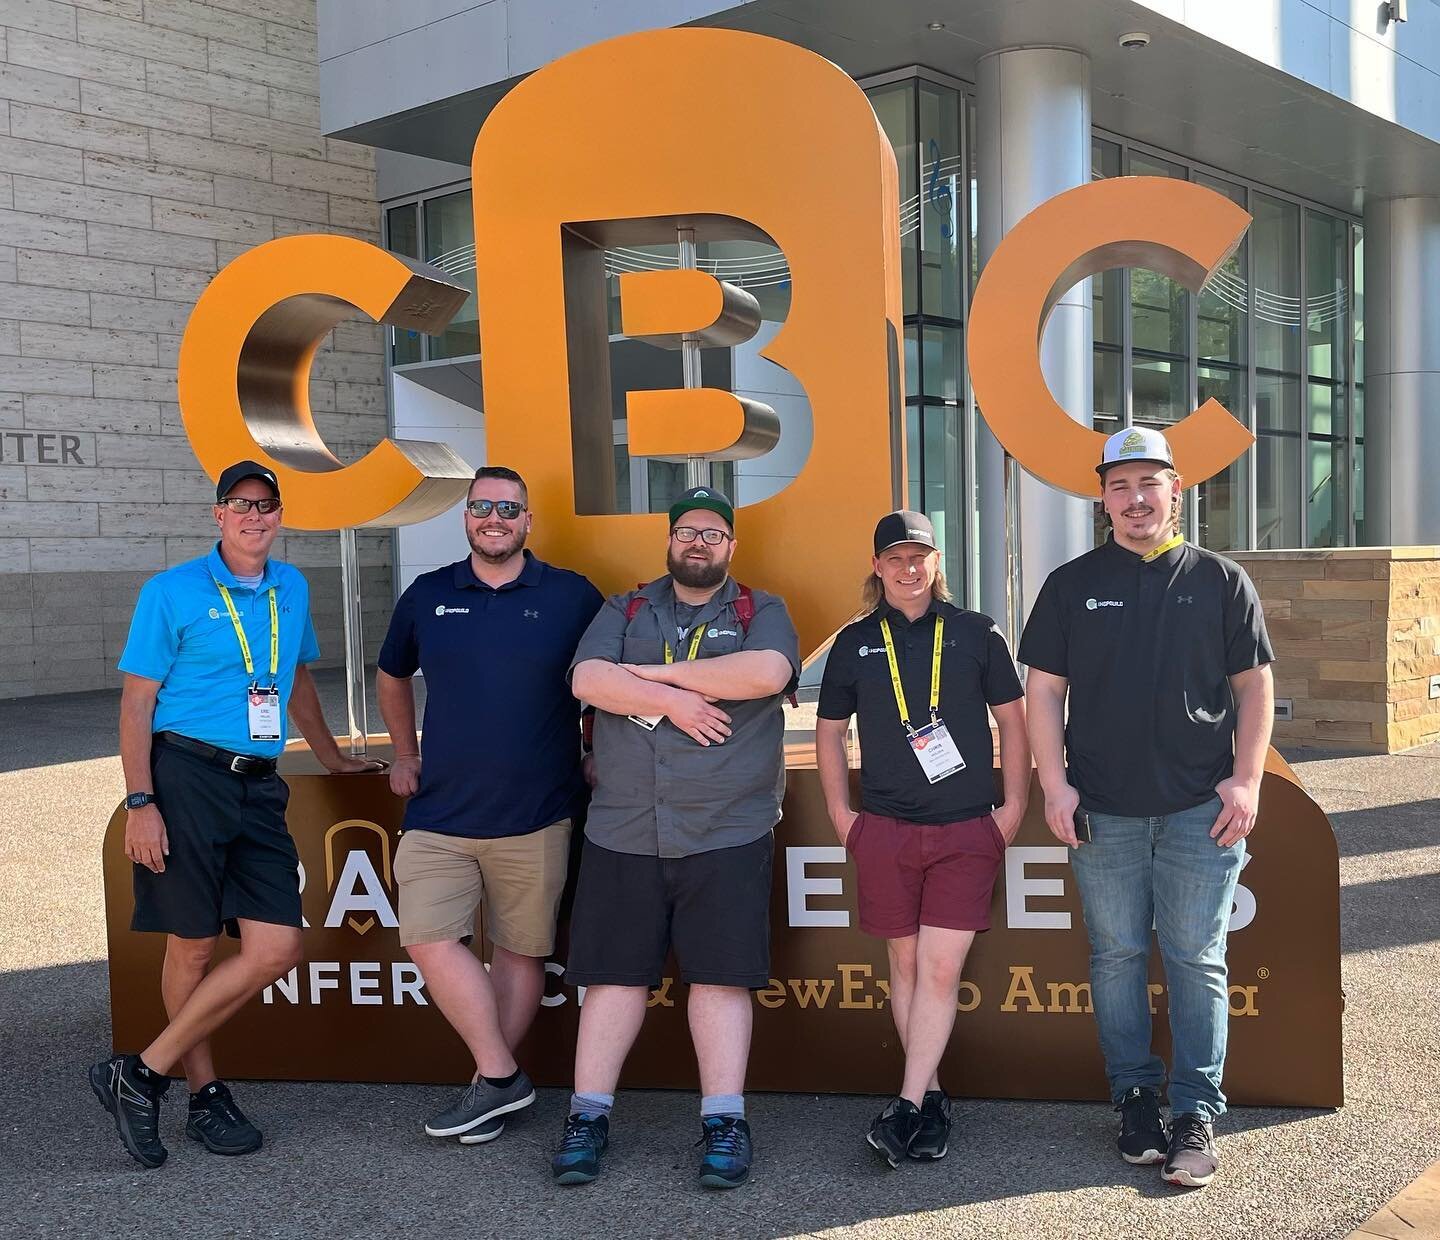 Thank you to all of the #craftbrewers this week at #craftbrewerscon. We had an amazing time in Nashville!! Good luck to all the brewers this afternoon at the World Beer Cup!
.
.
.
.
#hopguild #craftbrewersconference2023 #brewersassociation #ahhhromah